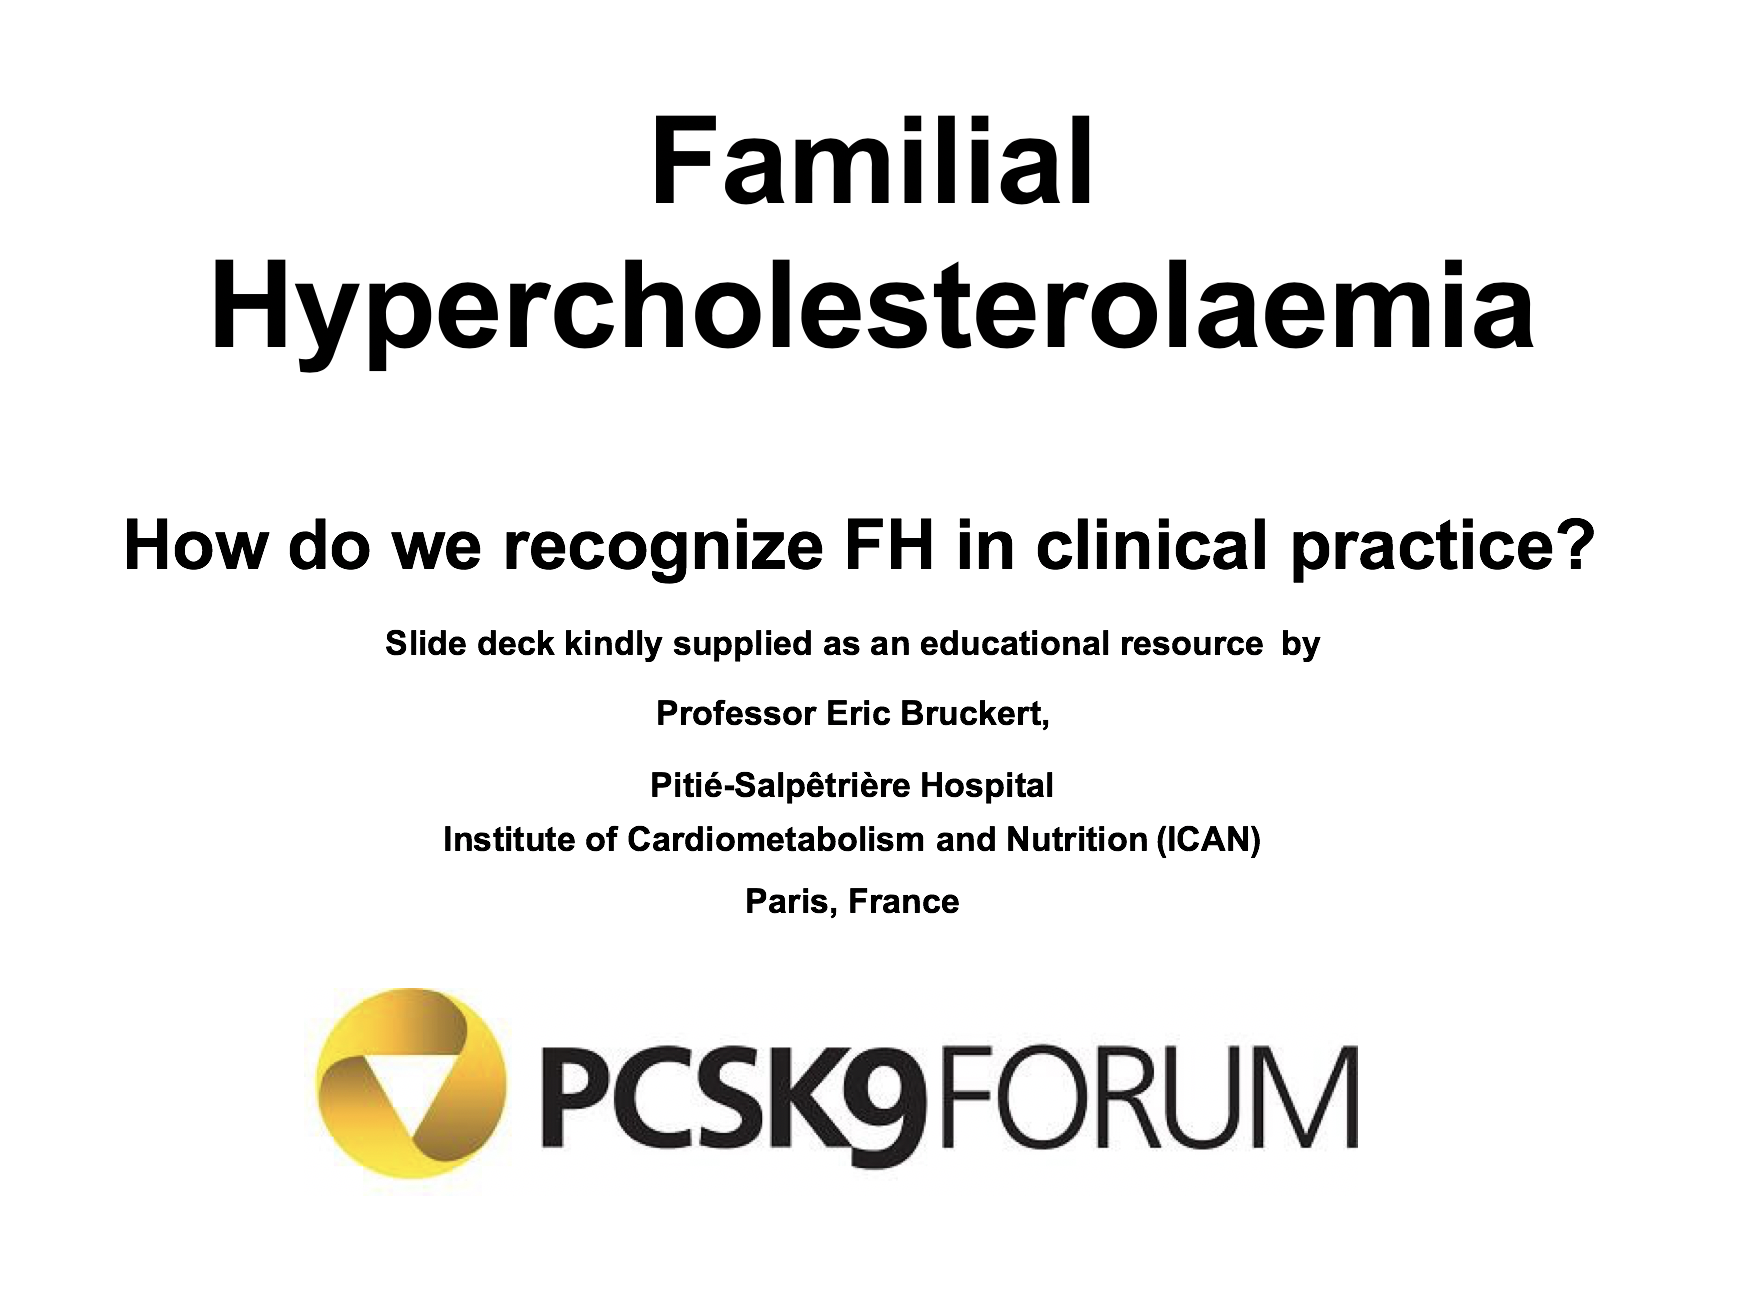 How do we recognize FH in clinical practice?